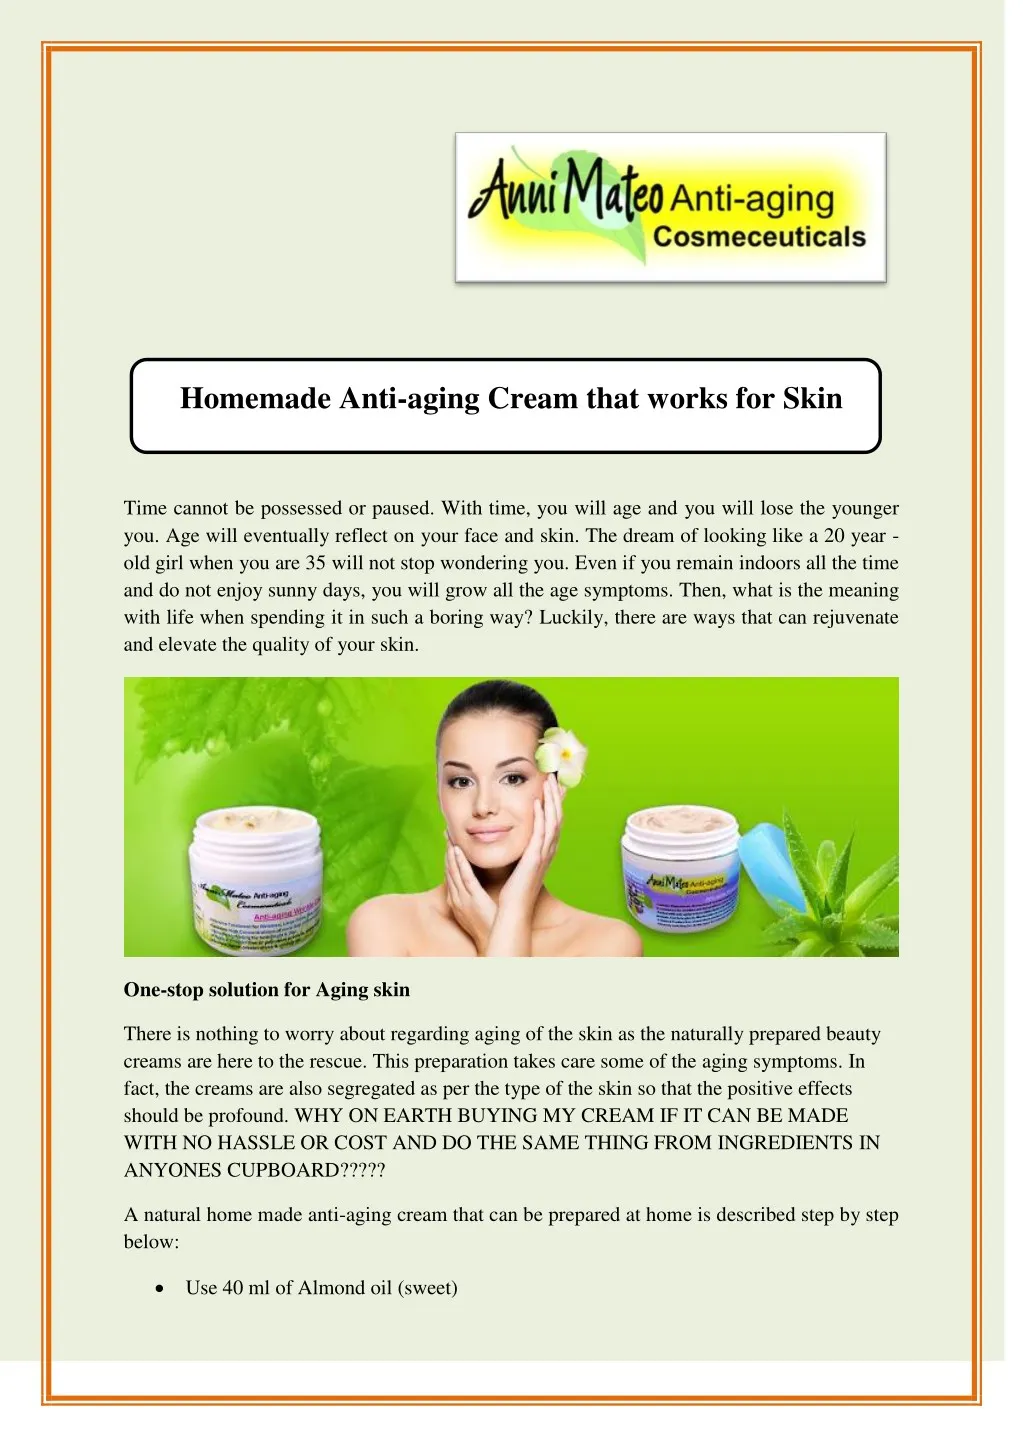 homemade anti aging cream that works for skin